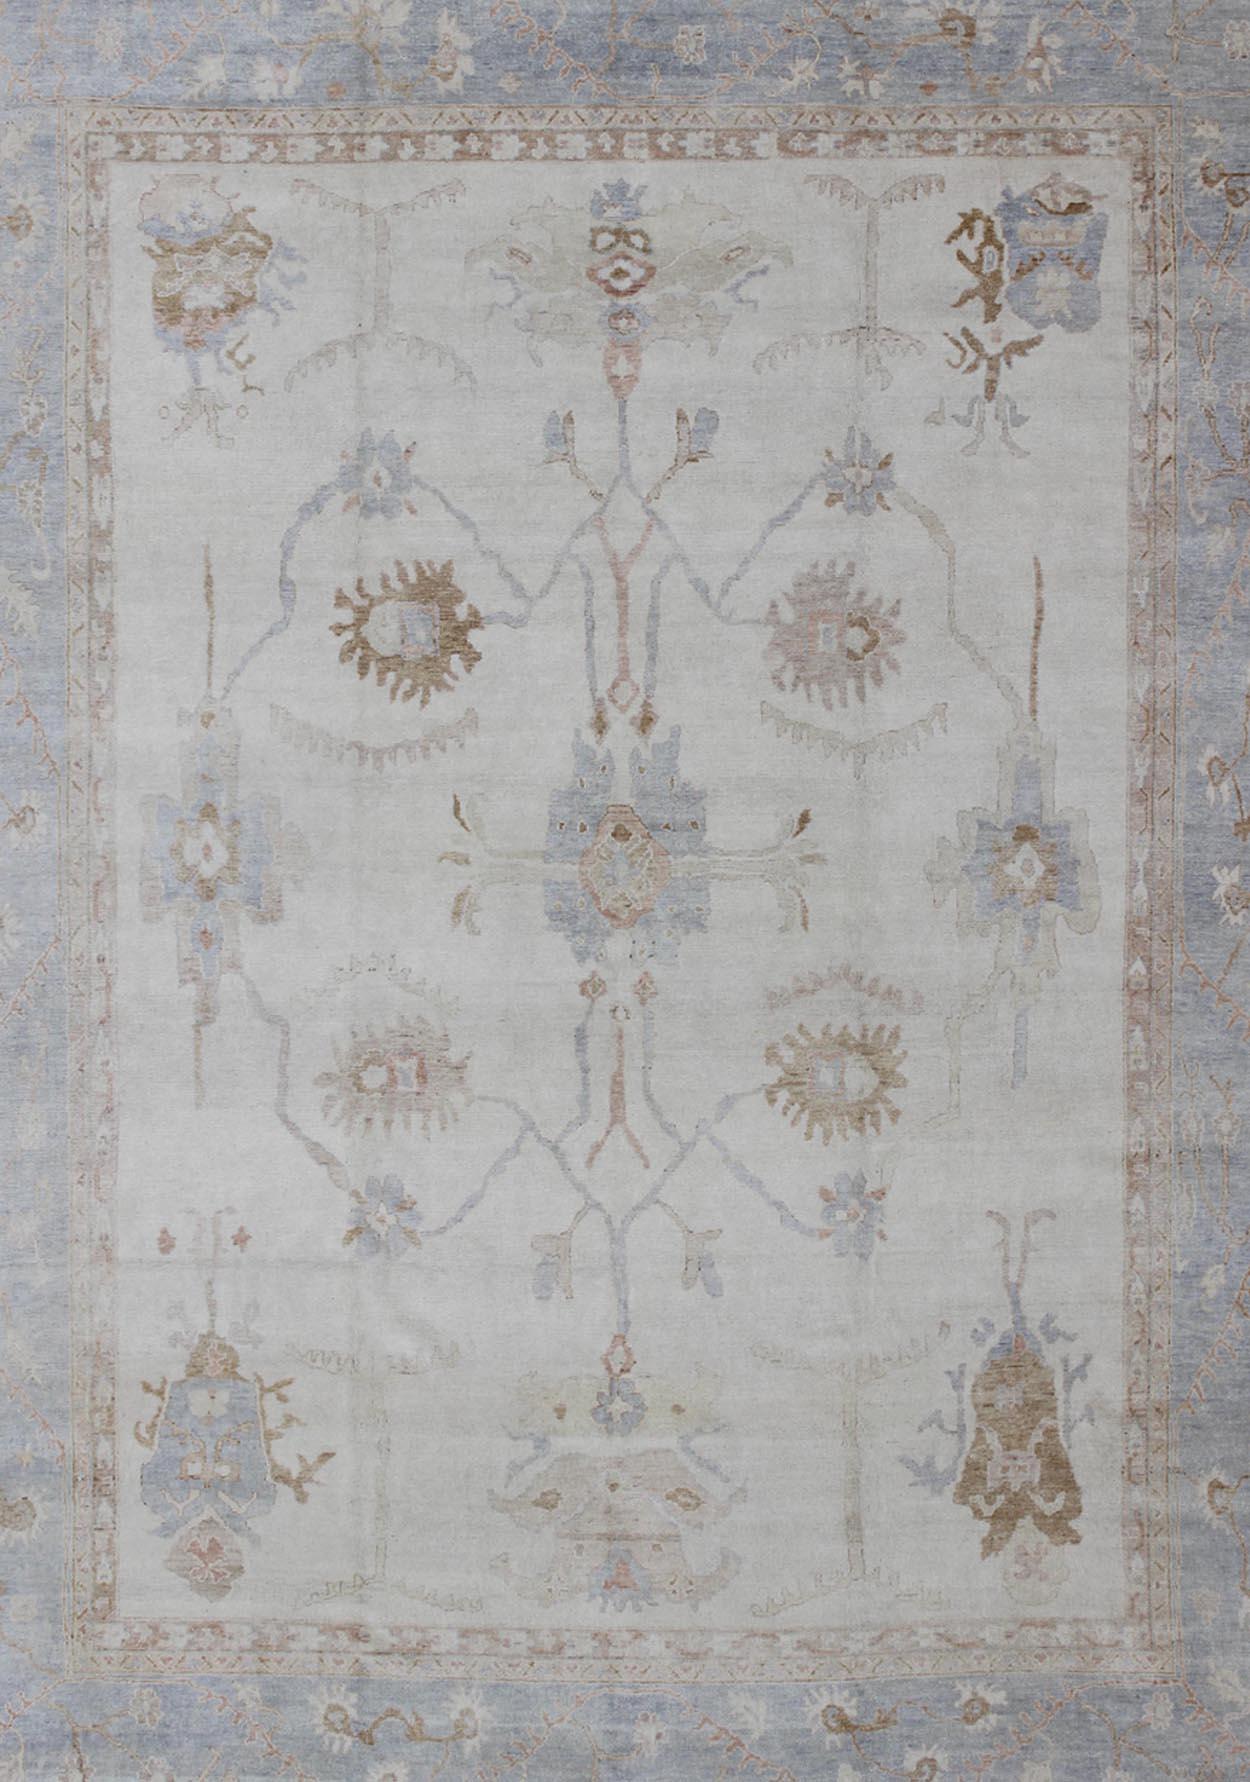 Hand-Knotted Large Oushak Rug in Blue, Light Brown, and White